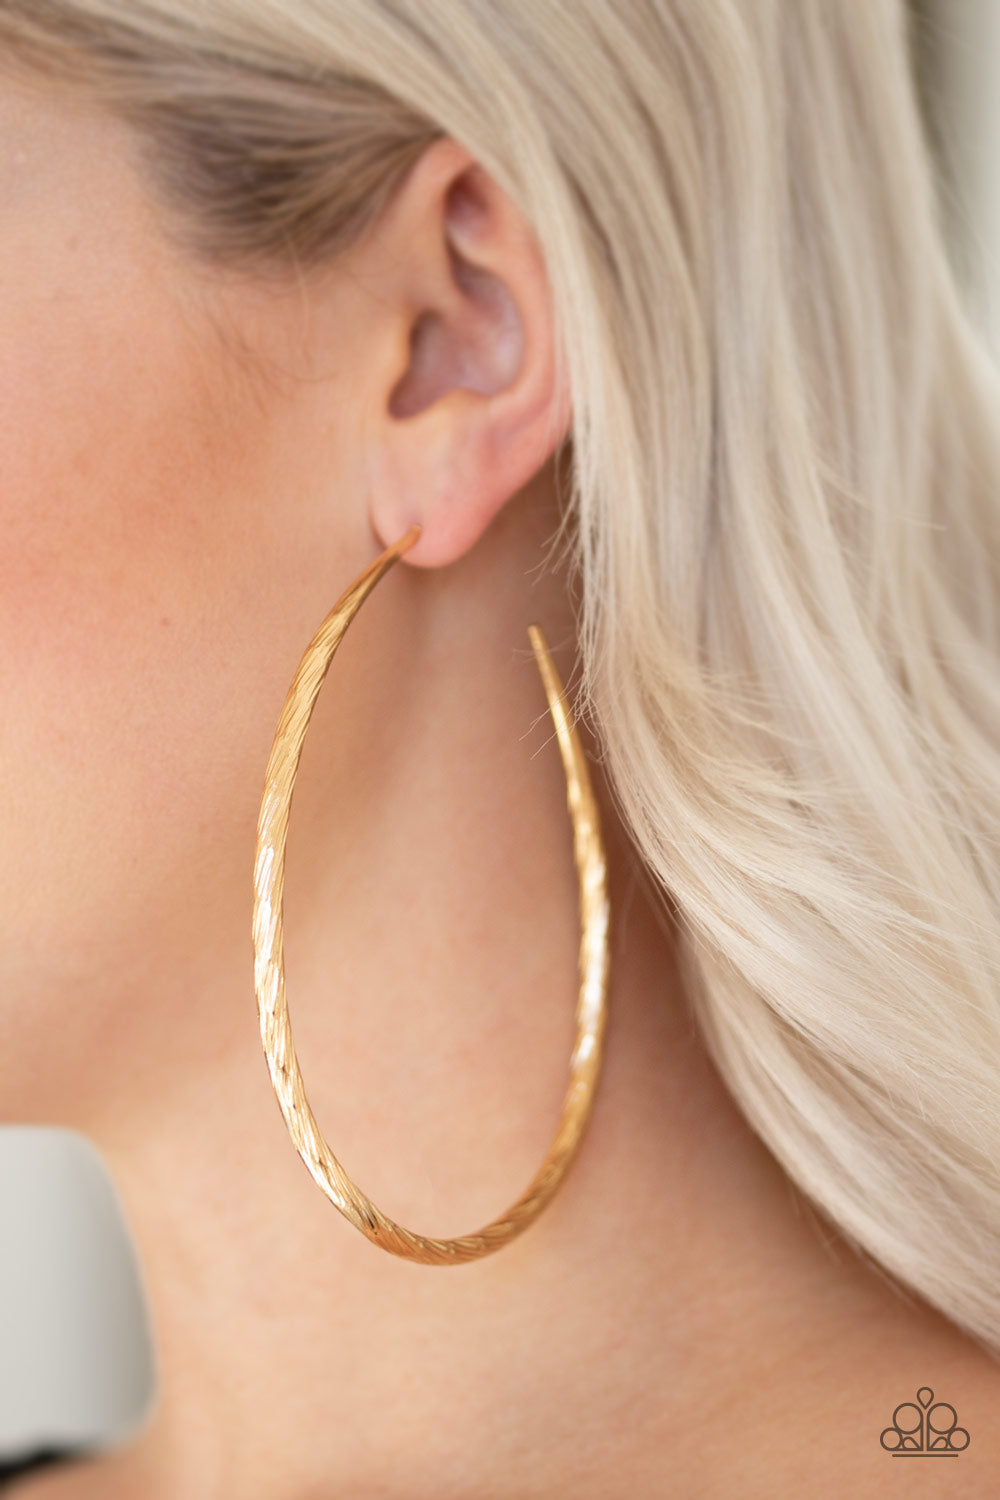 Etched in shimmer, a rippling gold bar bends into a dramatic asymmetrical hoop for a showstopping look. Earring attaches to a standard post fitting. Hoop measures 3